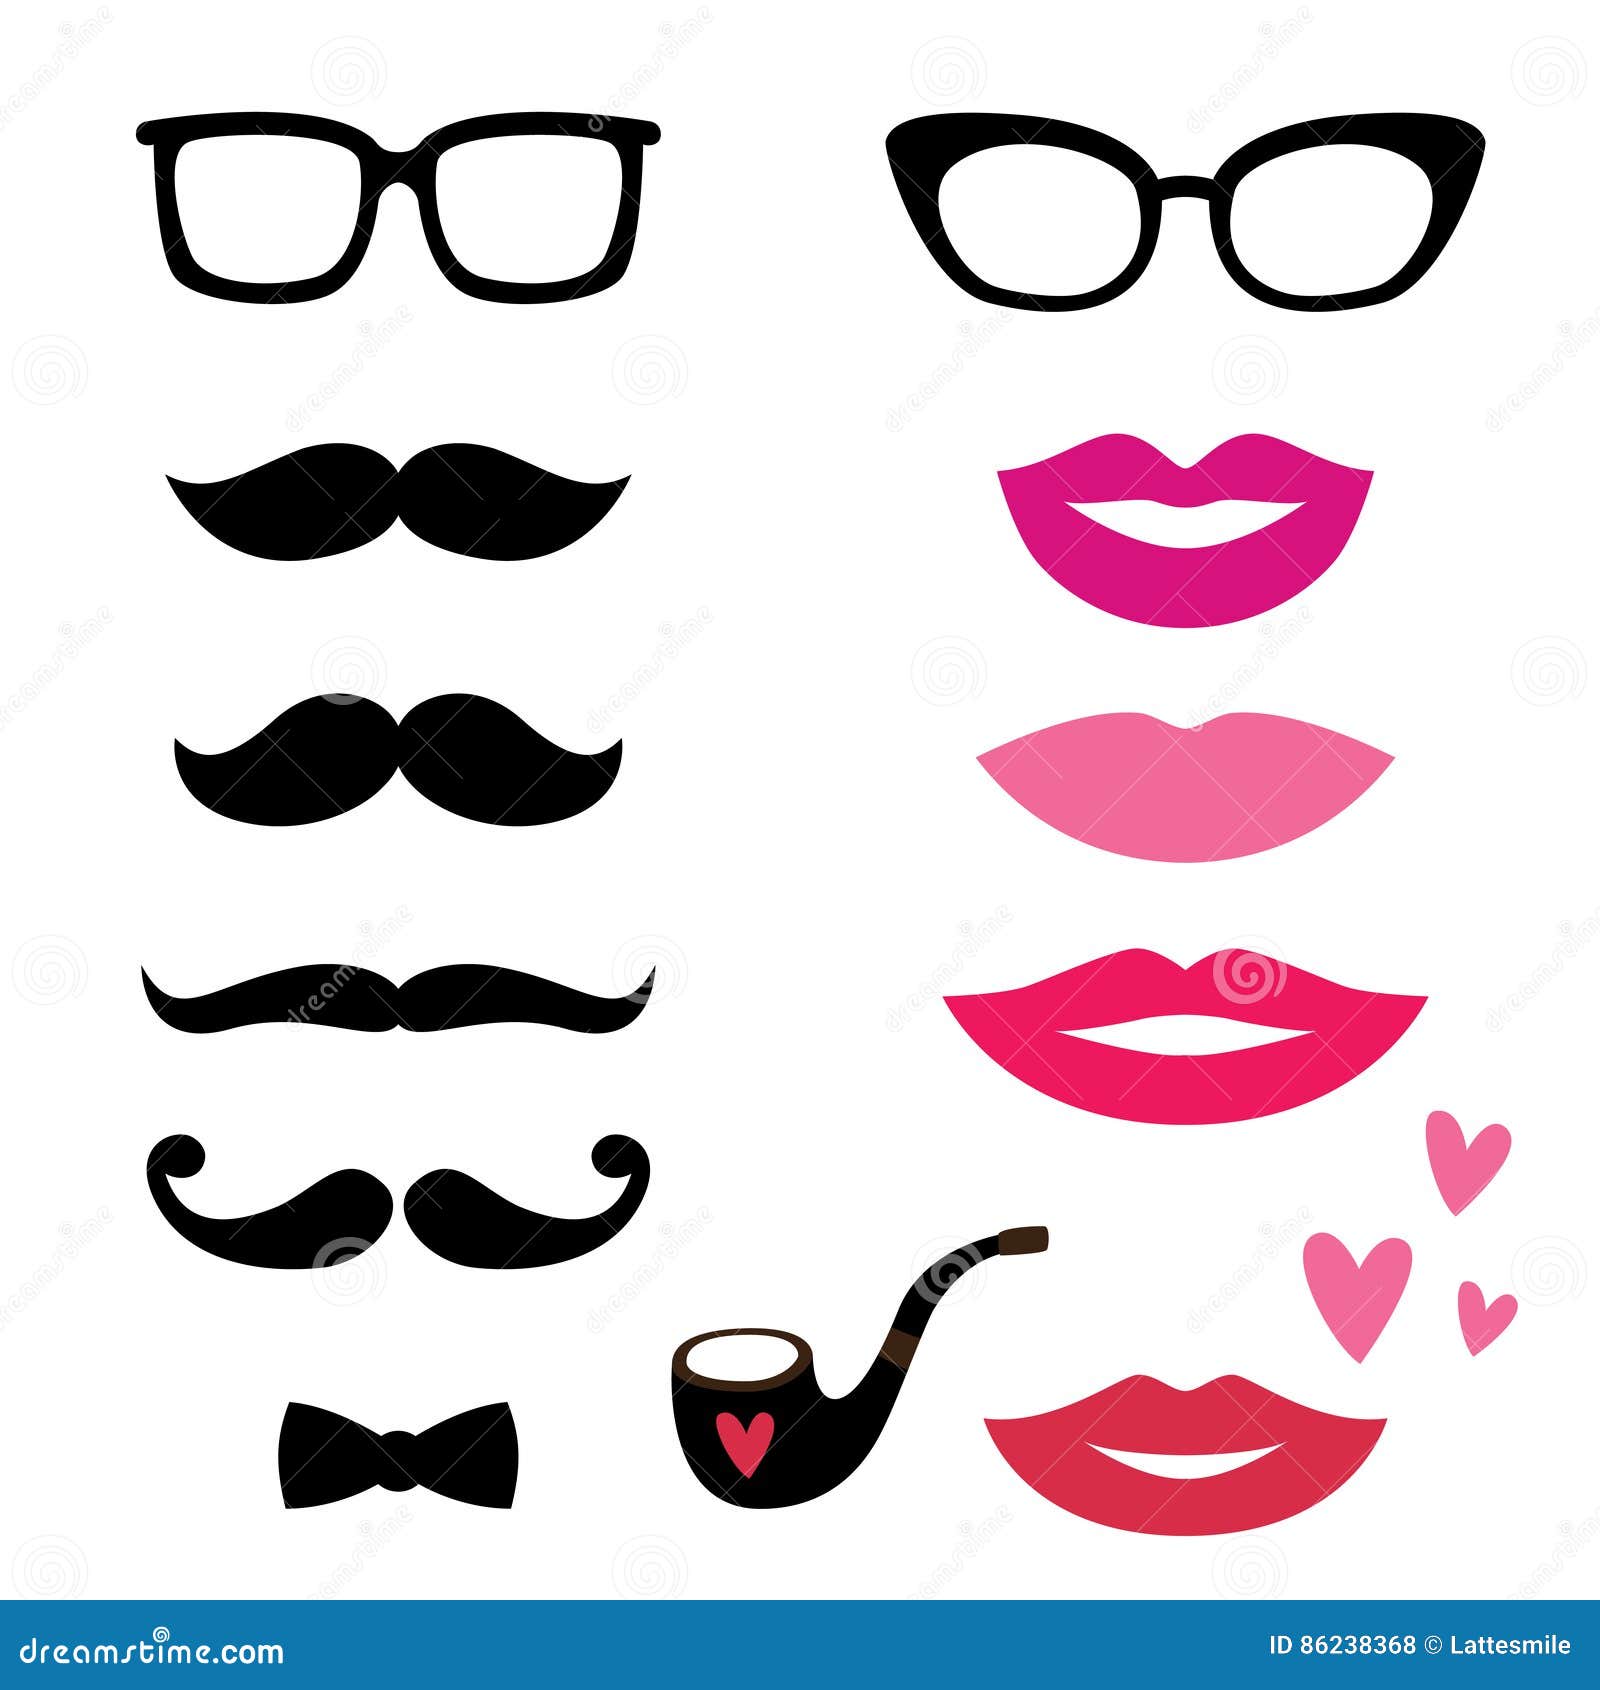 lips and mustaches set